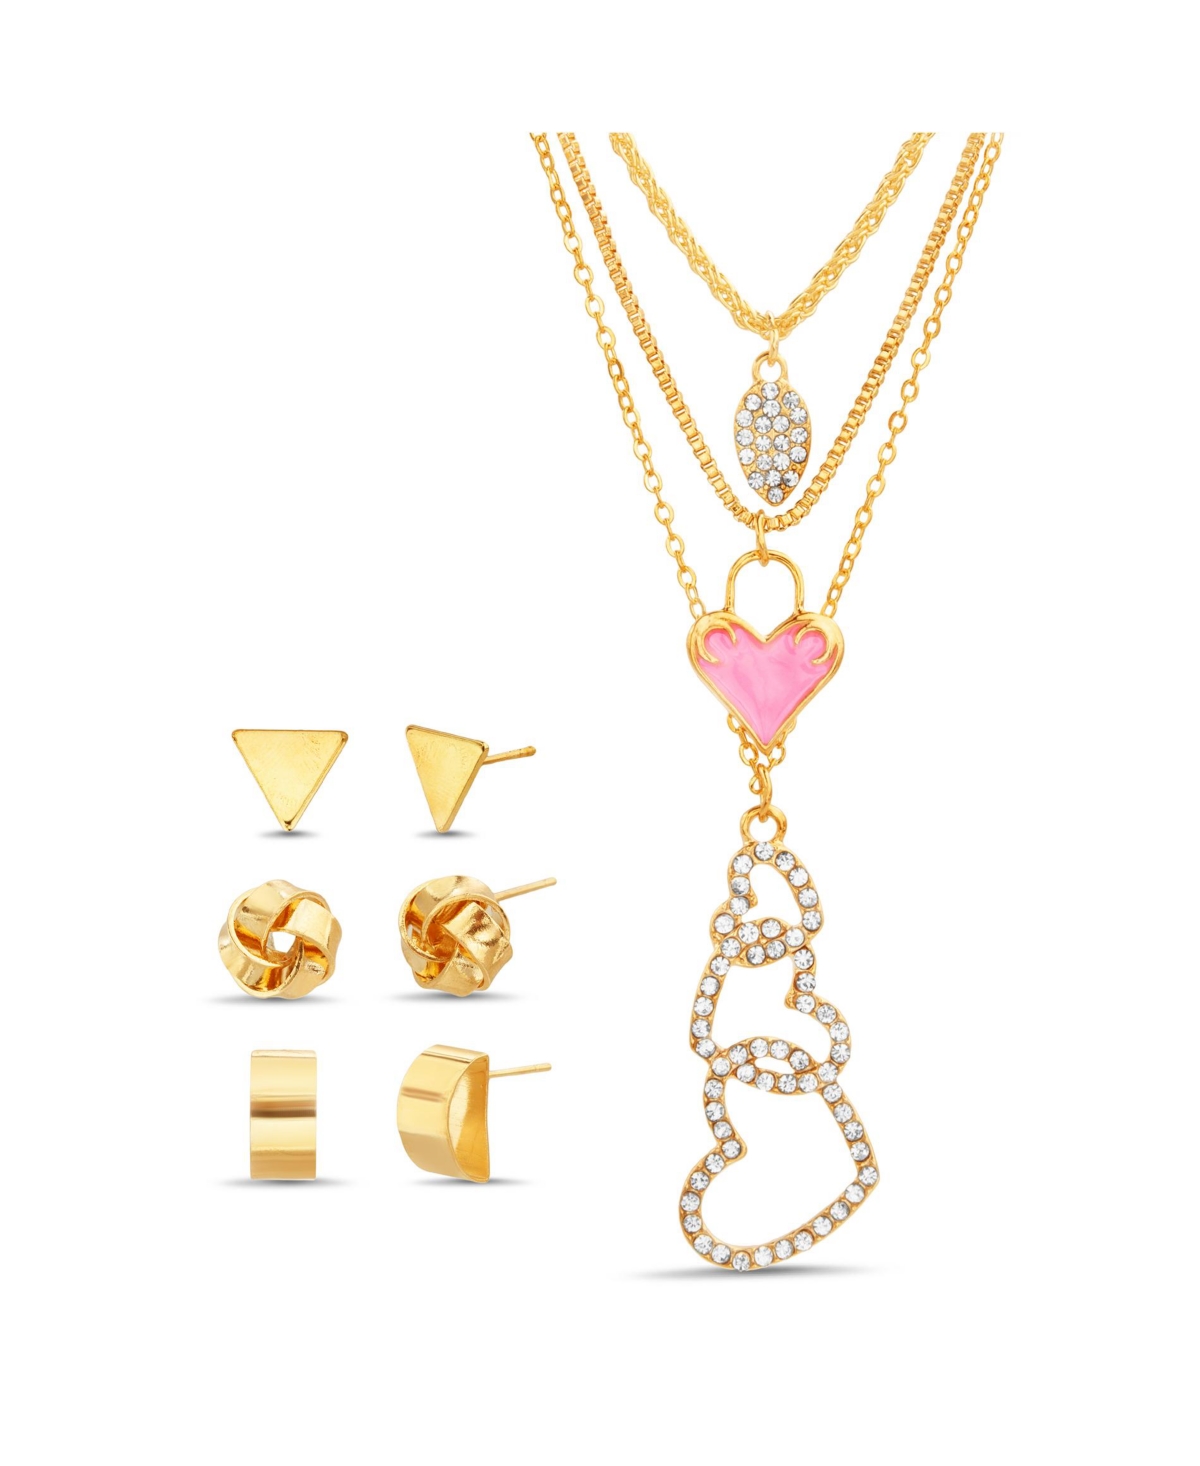 Gold-Tone Heart Necklace and Earrings Set - Gold